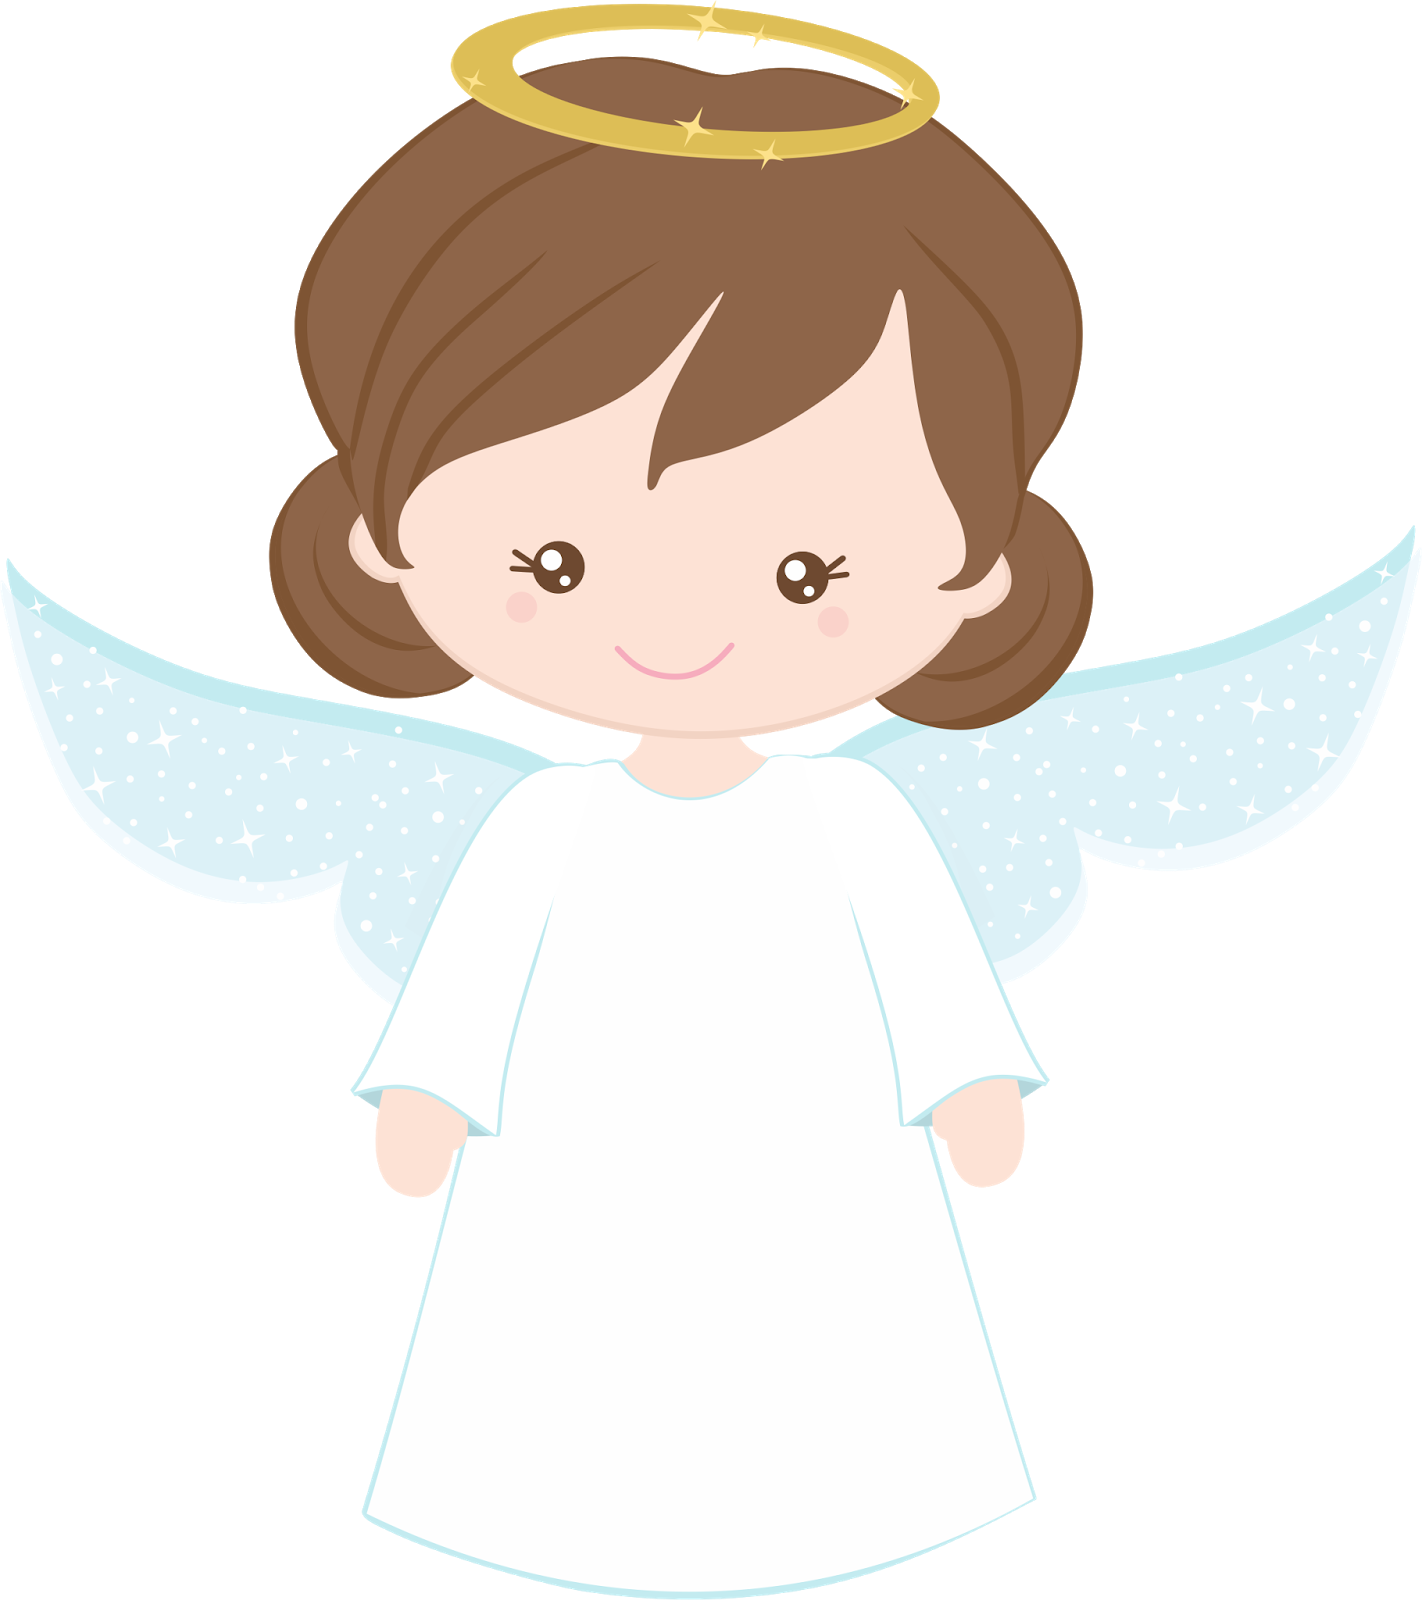 halo clipart pink angel